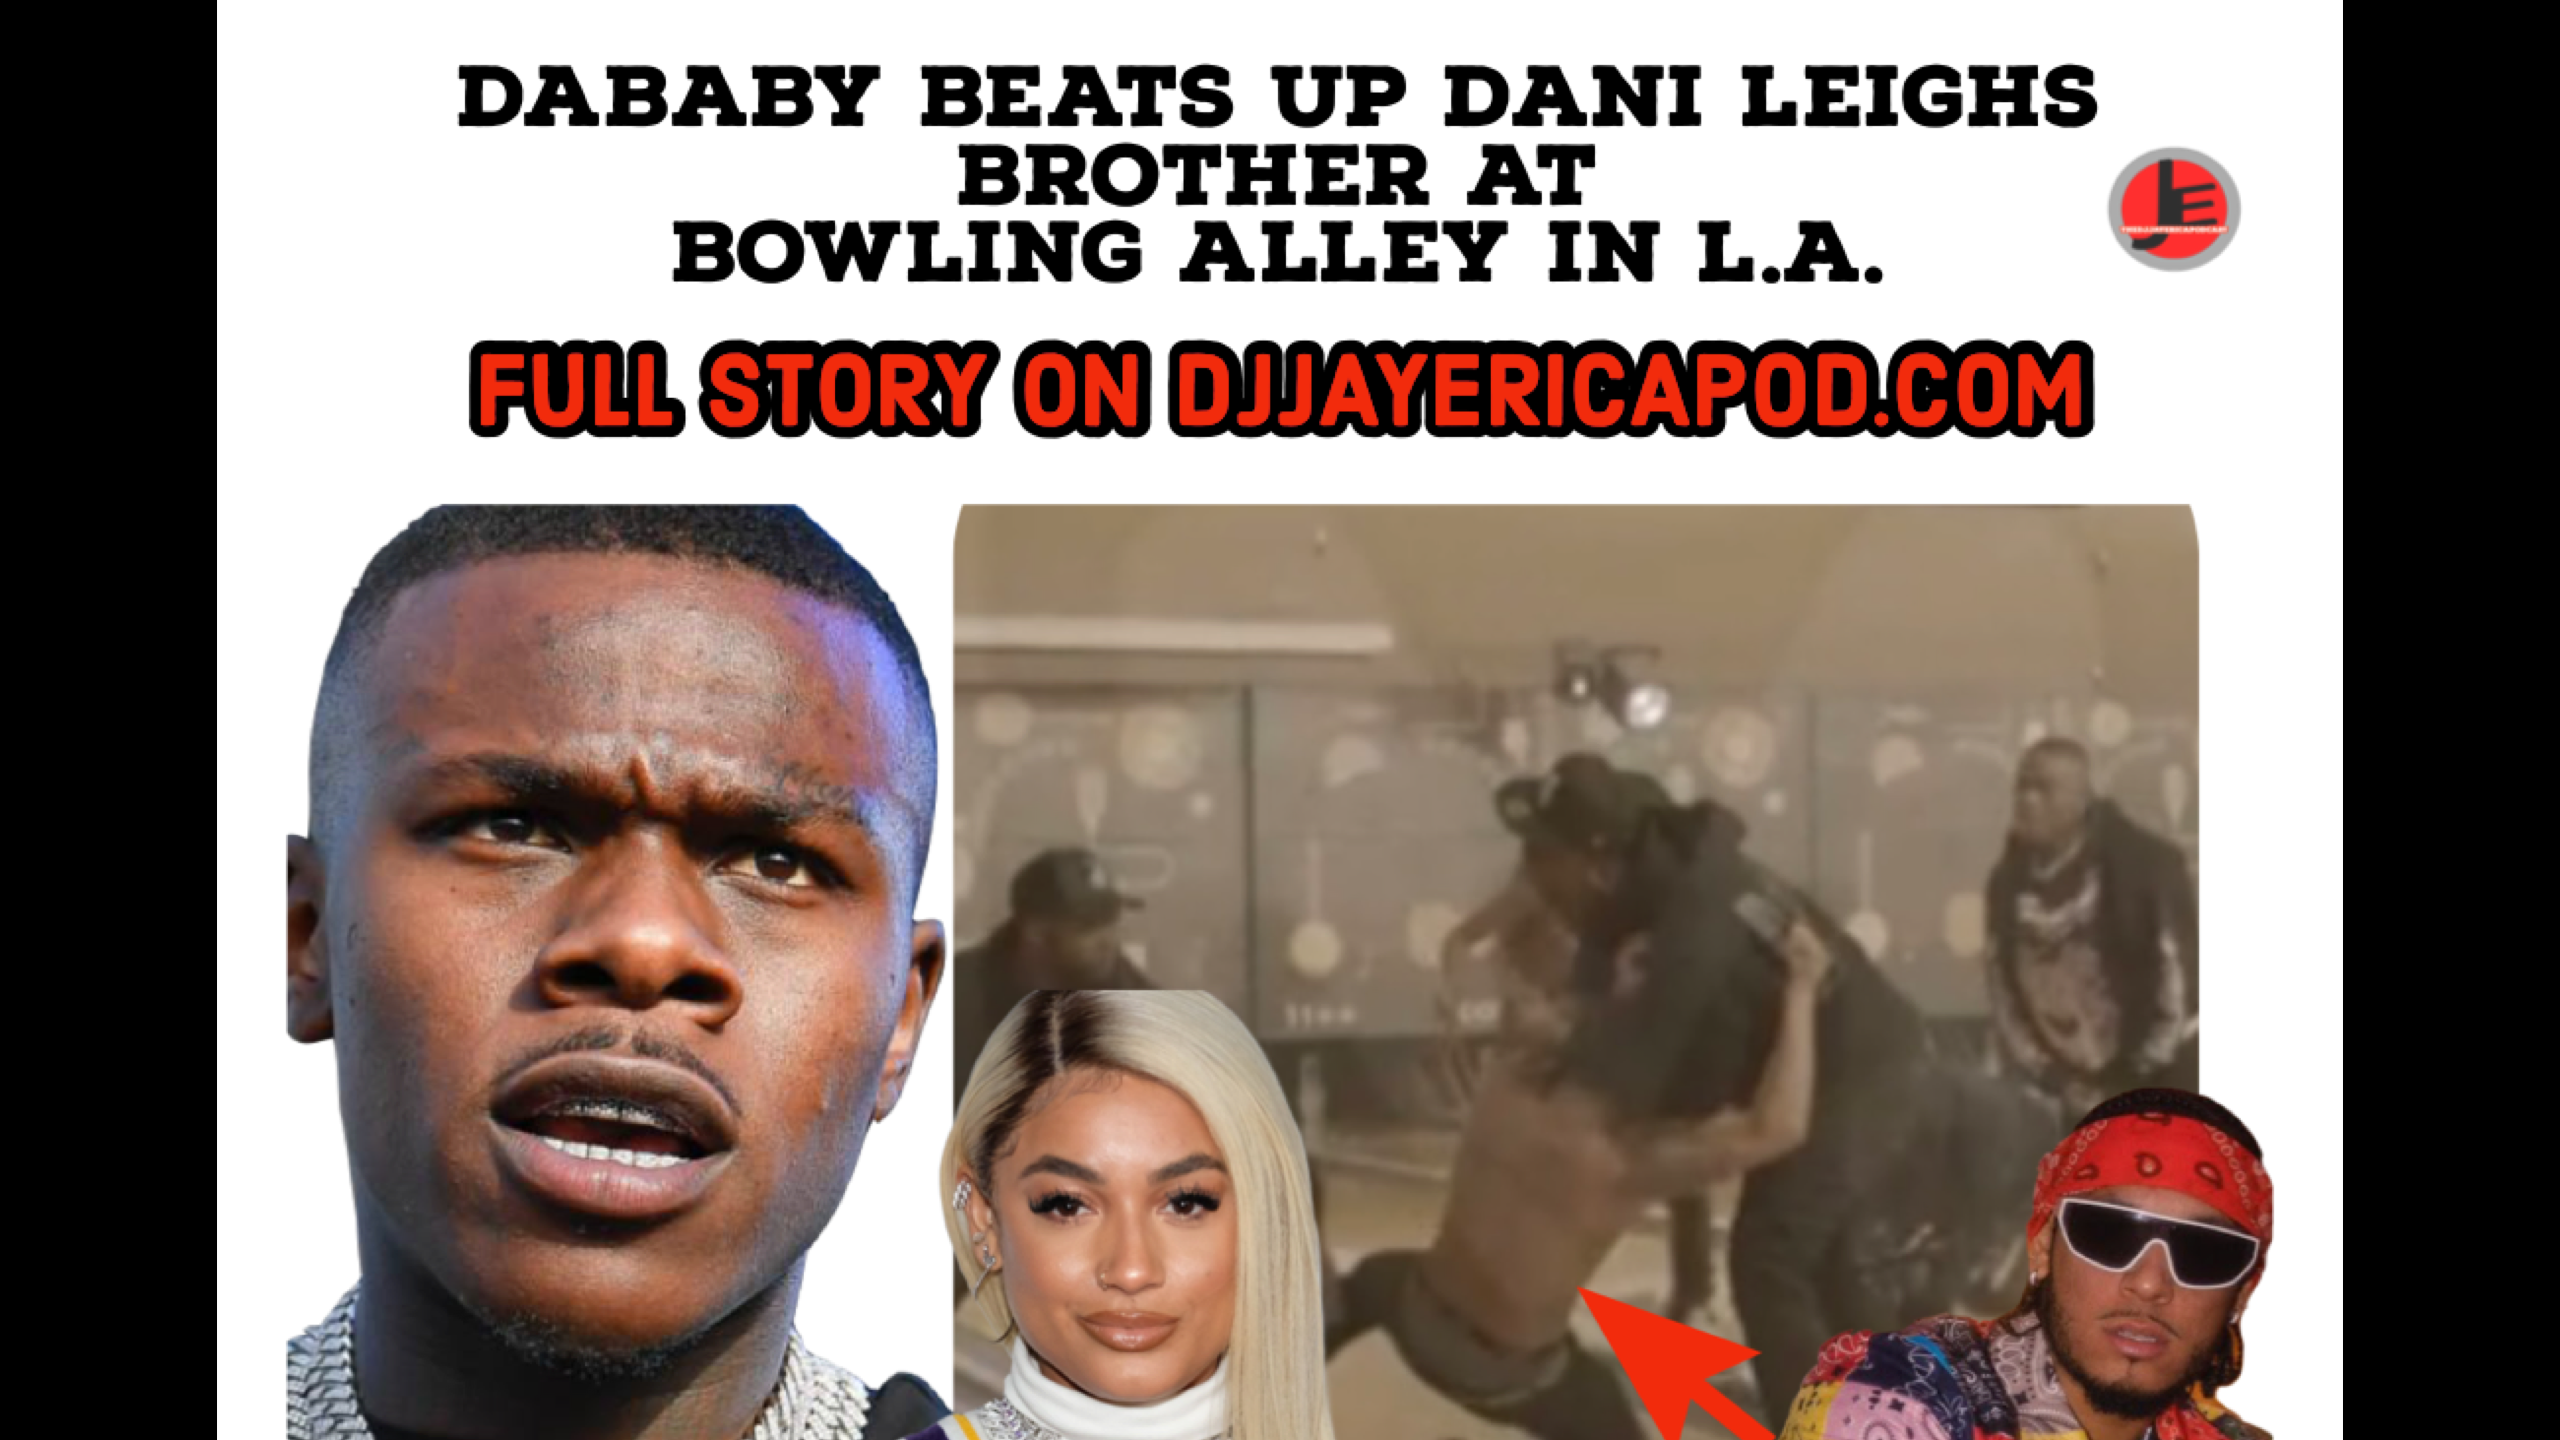 DABABY JUMPS DANI LEIGH BROTHER AT BOWLING ALLEY IN L.A. ON VIDEO